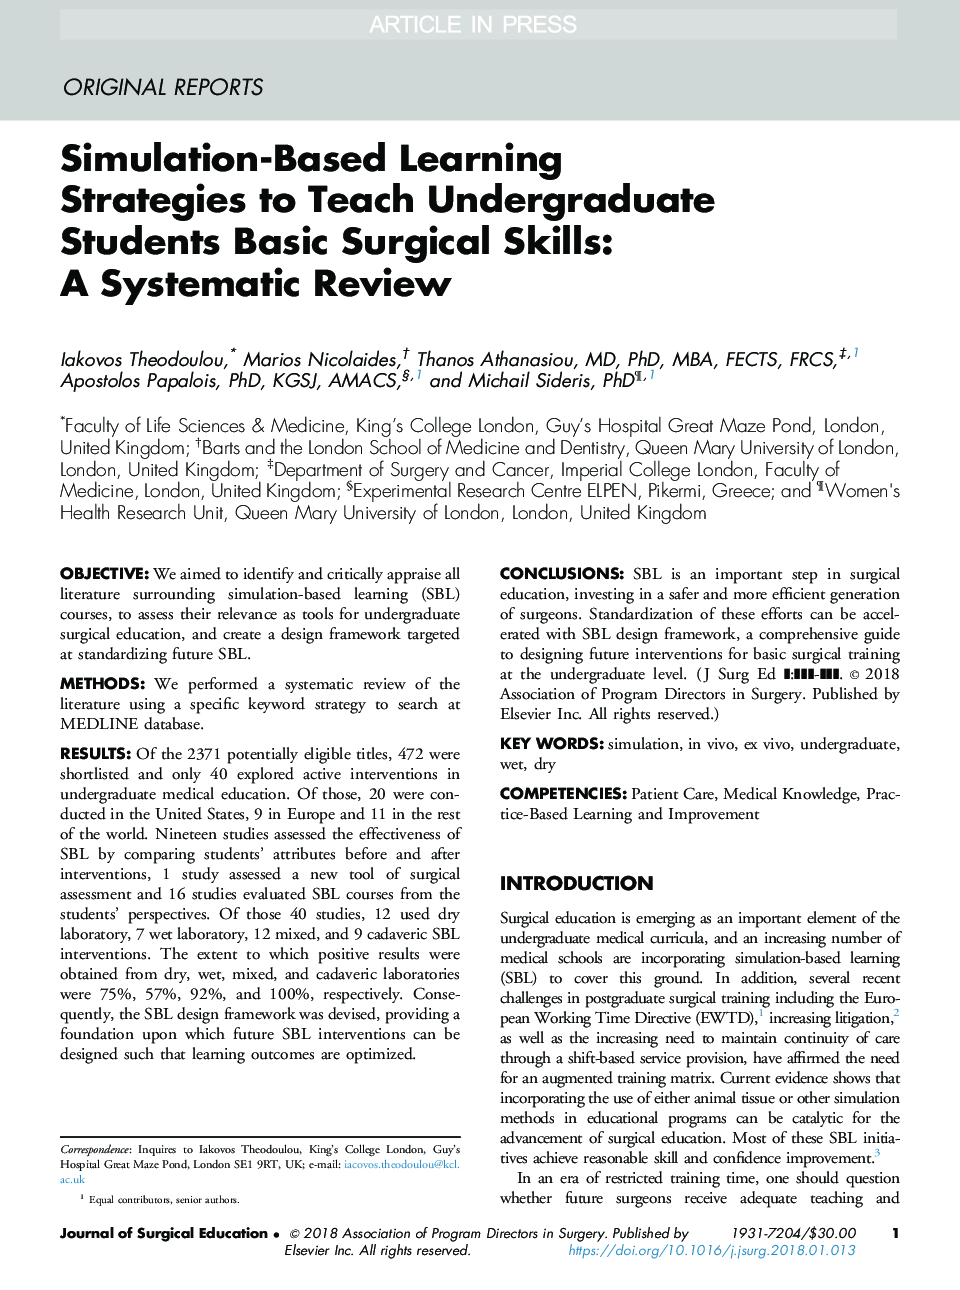 Simulation-Based Learning Strategies to Teach Undergraduate Students Basic Surgical Skills: A Systematic Review